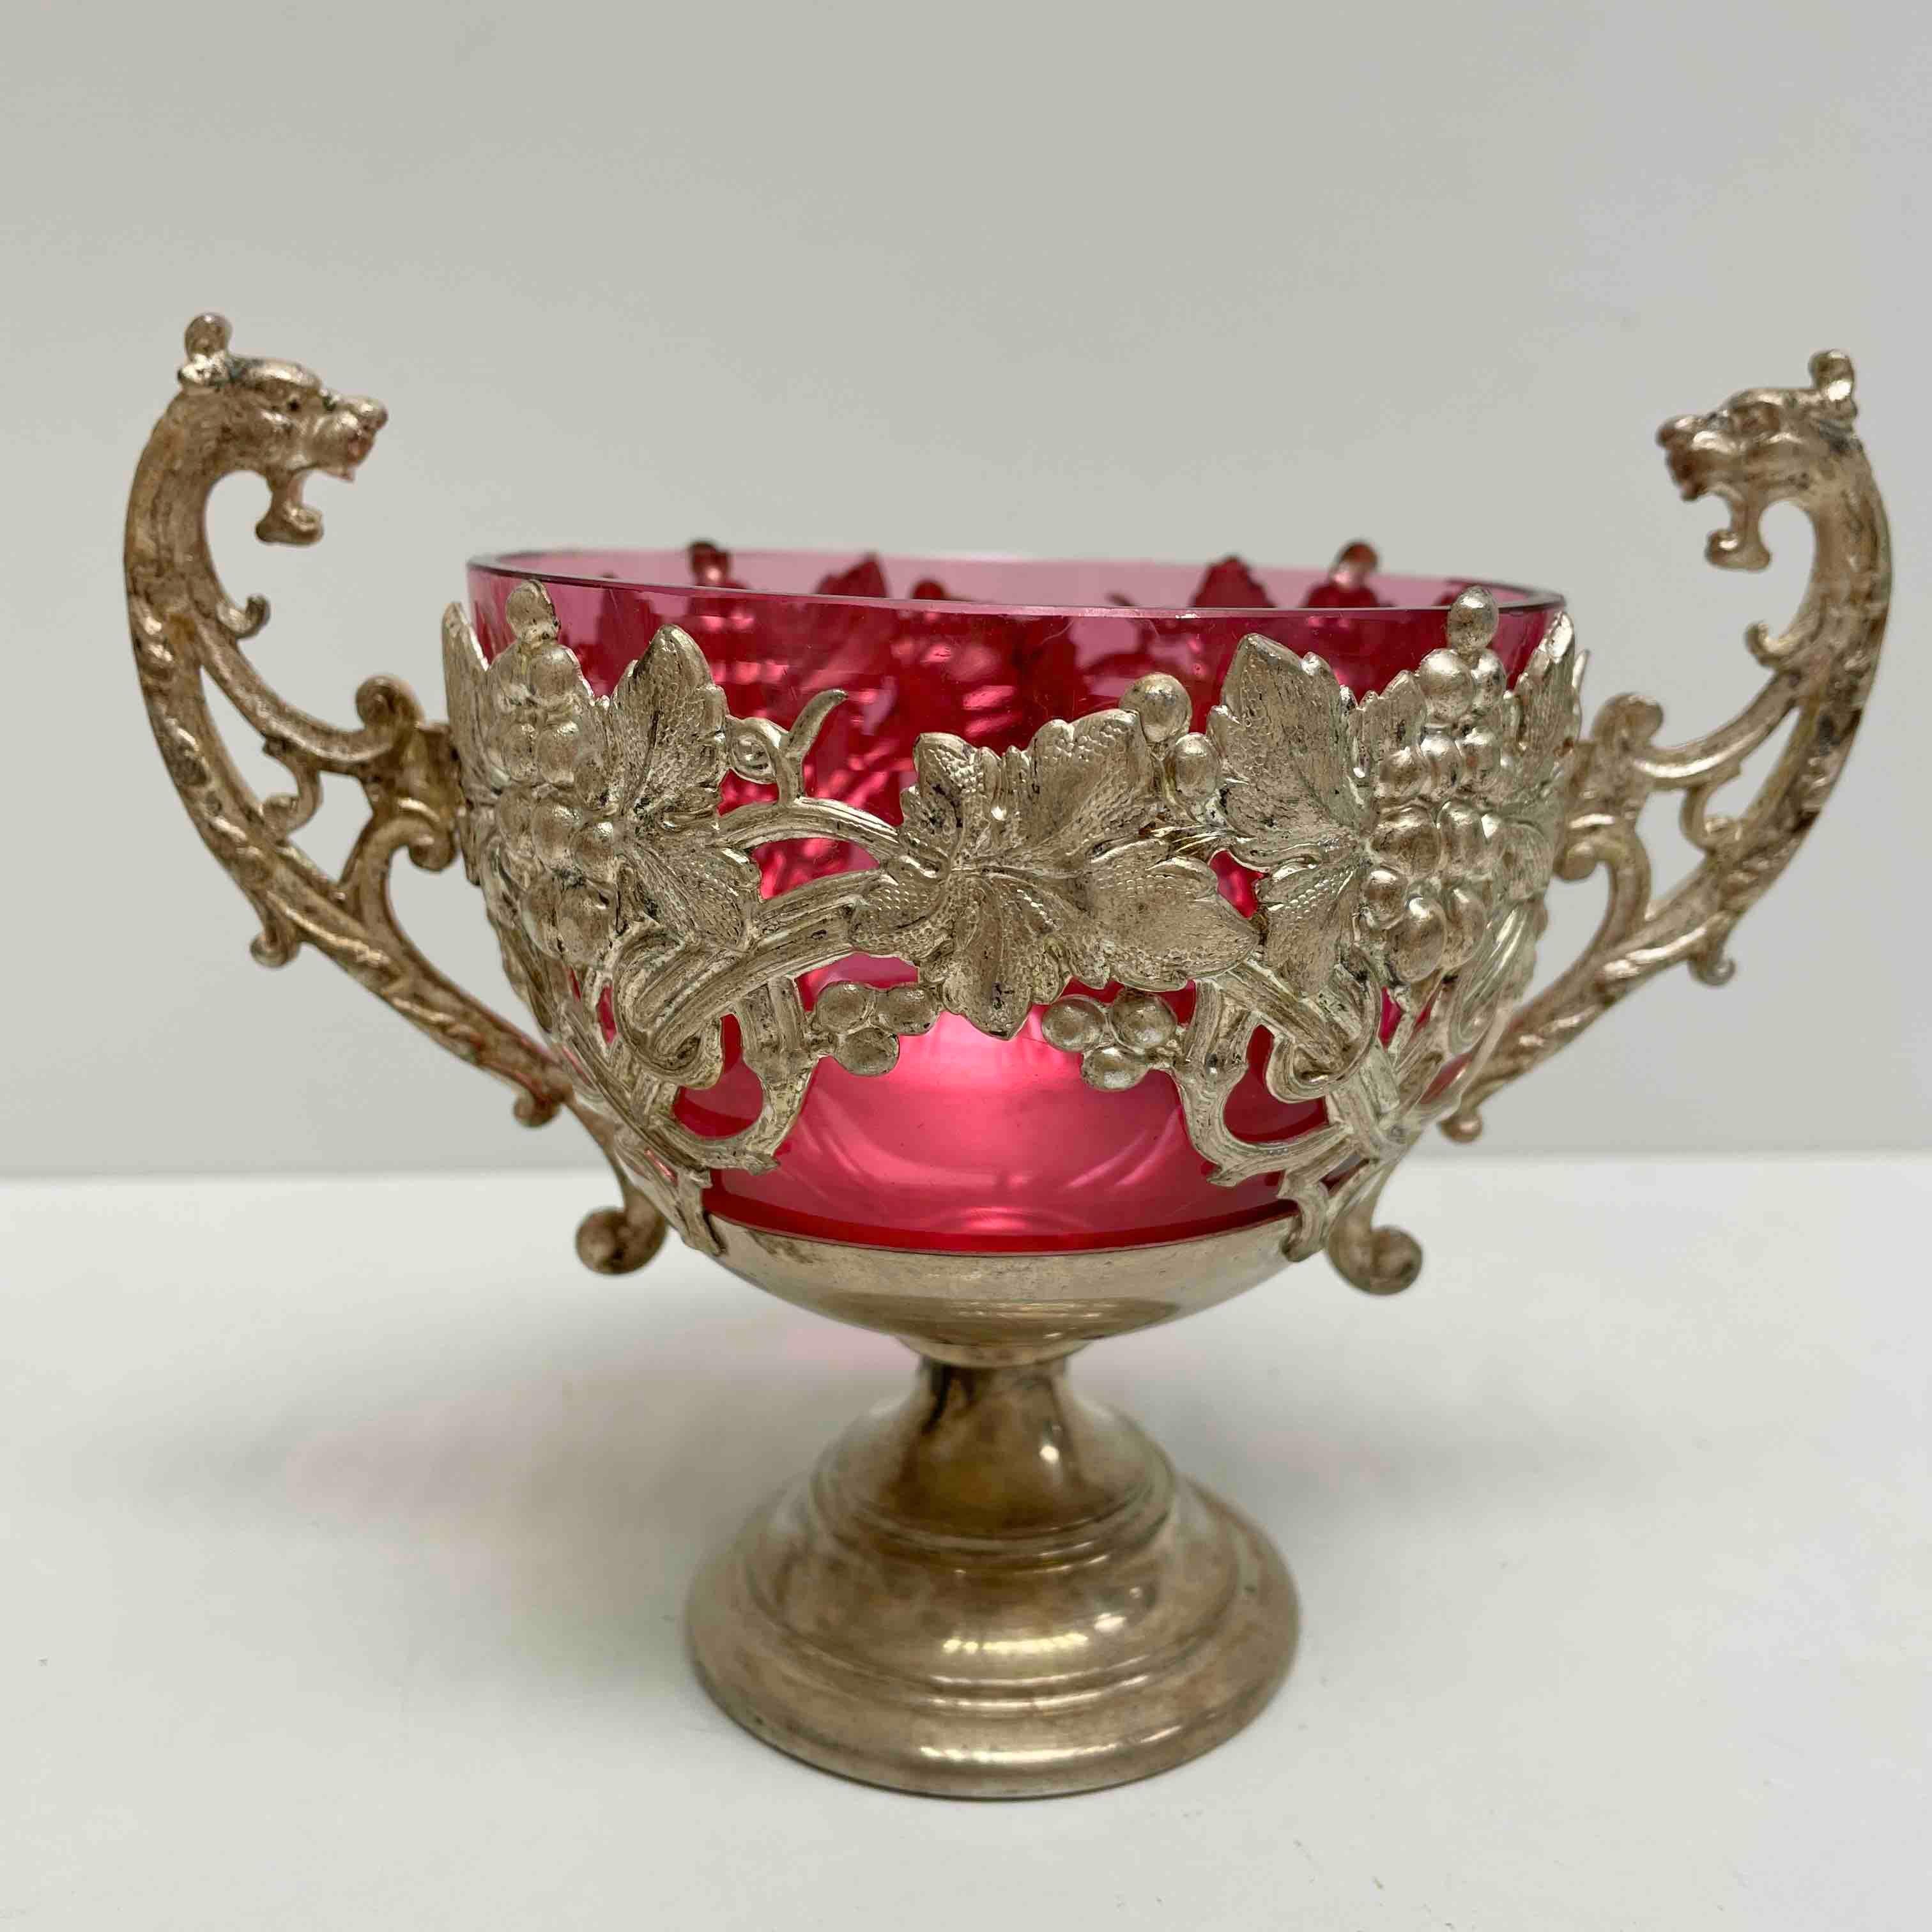 Gorgeous silver plated, 1910s bowl or catchall. Made of silver plated metal frame with dragon handles and a pink glass. Think it can be used at a table for paperclips, toothpicks, matchsticks or just as an open salt pot or to store everything you